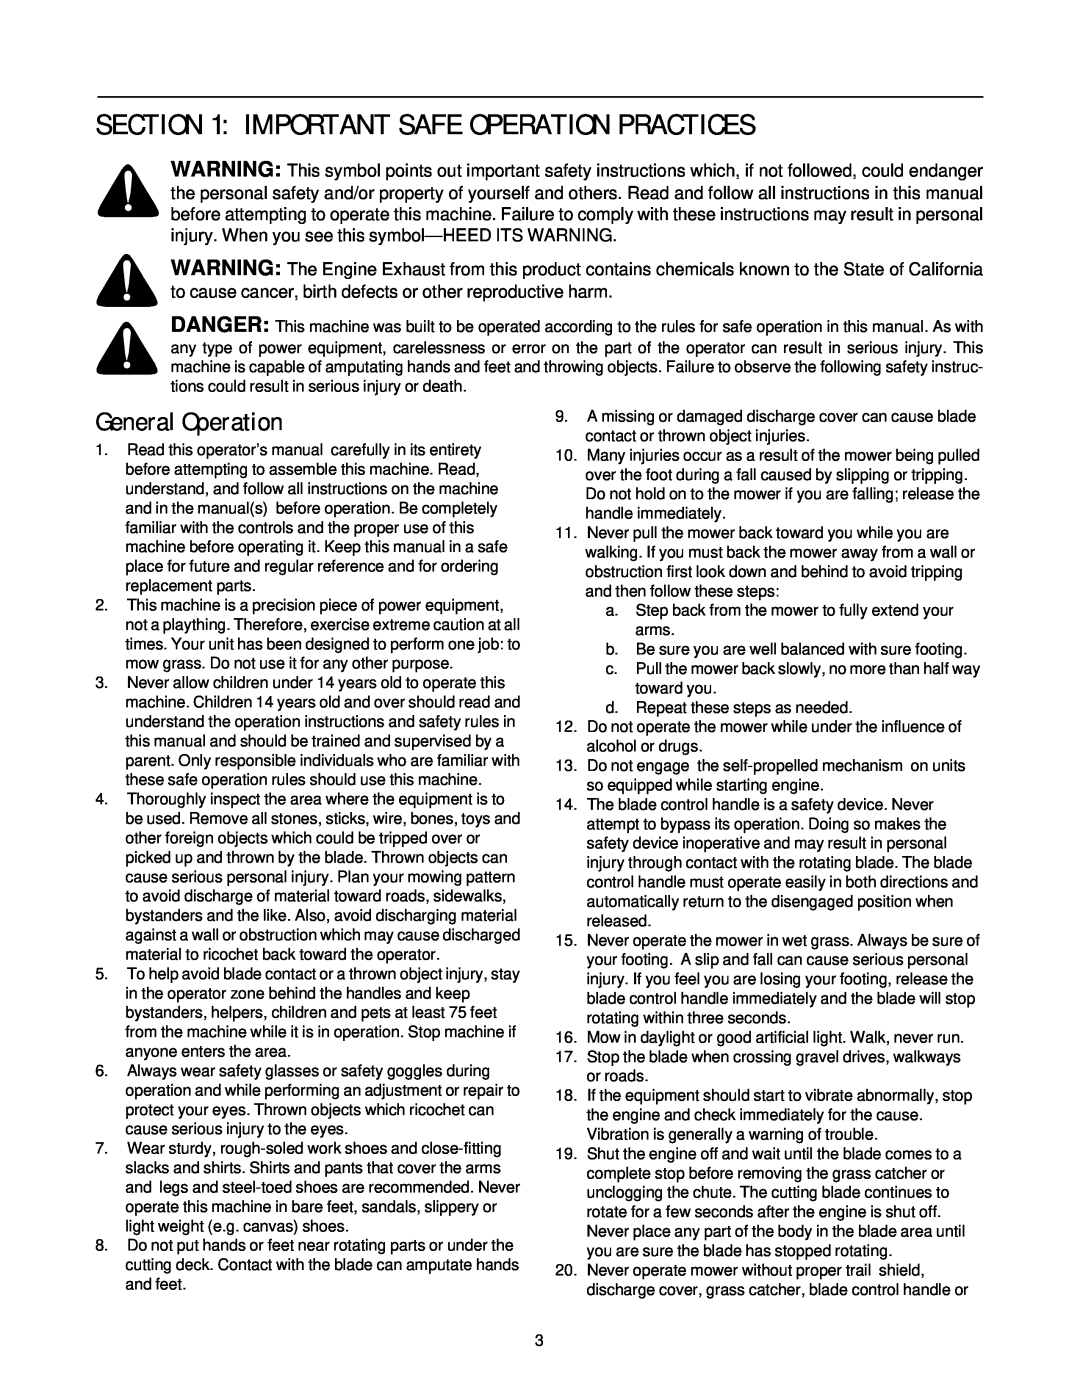 Yard-Man 589 manual Important Safe Operation Practices, General Operation 